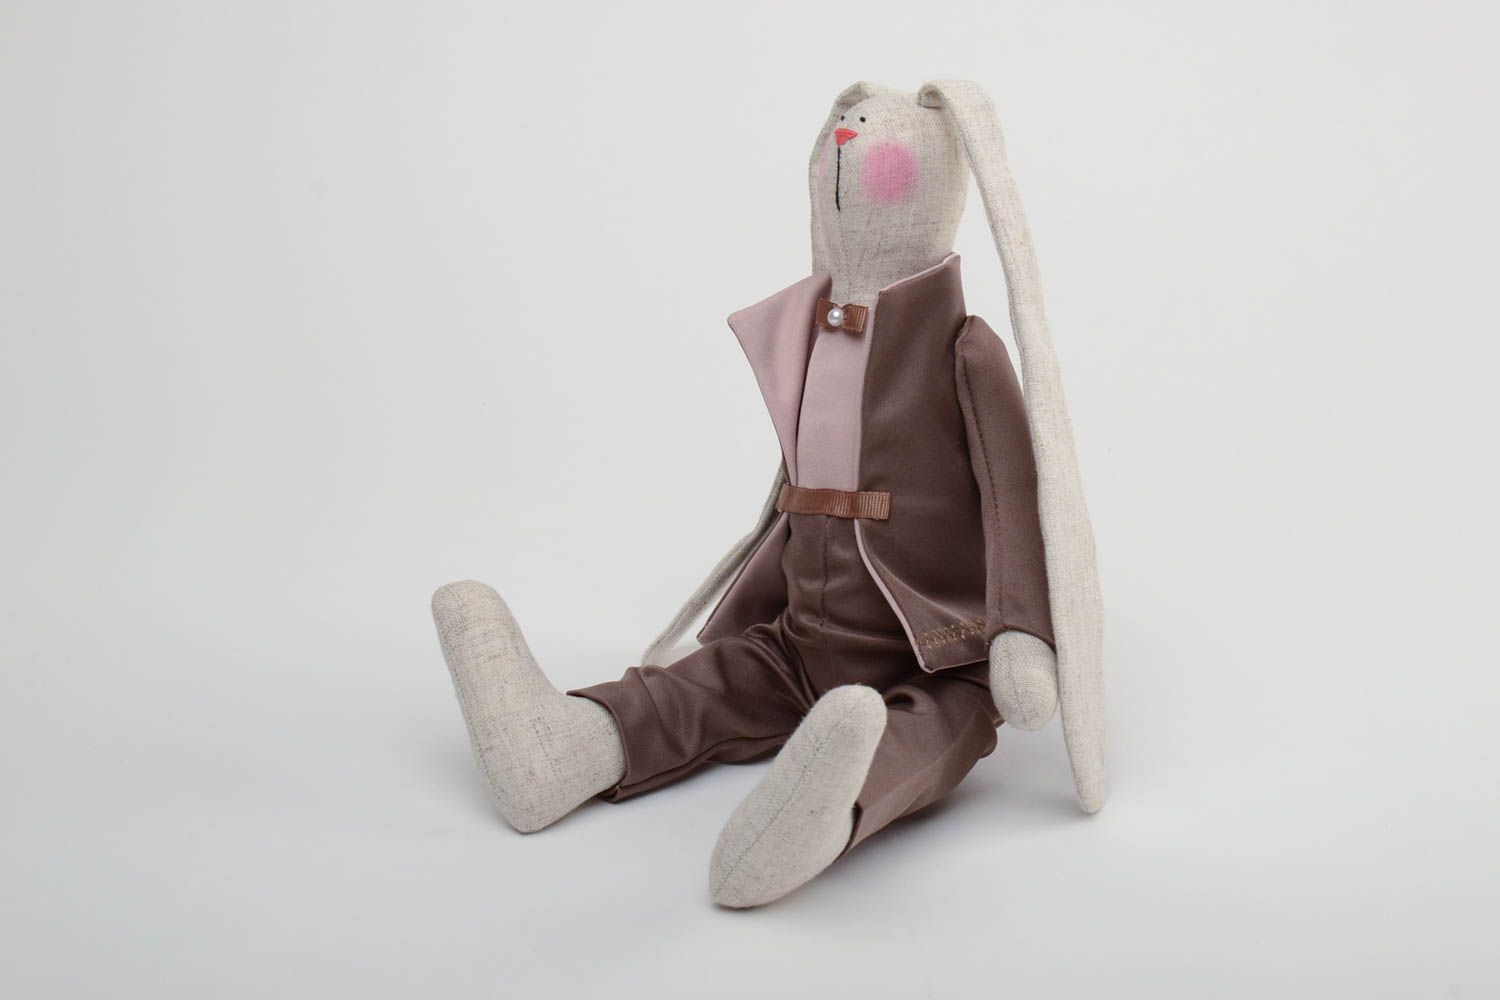 Handmade decorative fabric toy cute bunny in suit made of cotton interior decor photo 3